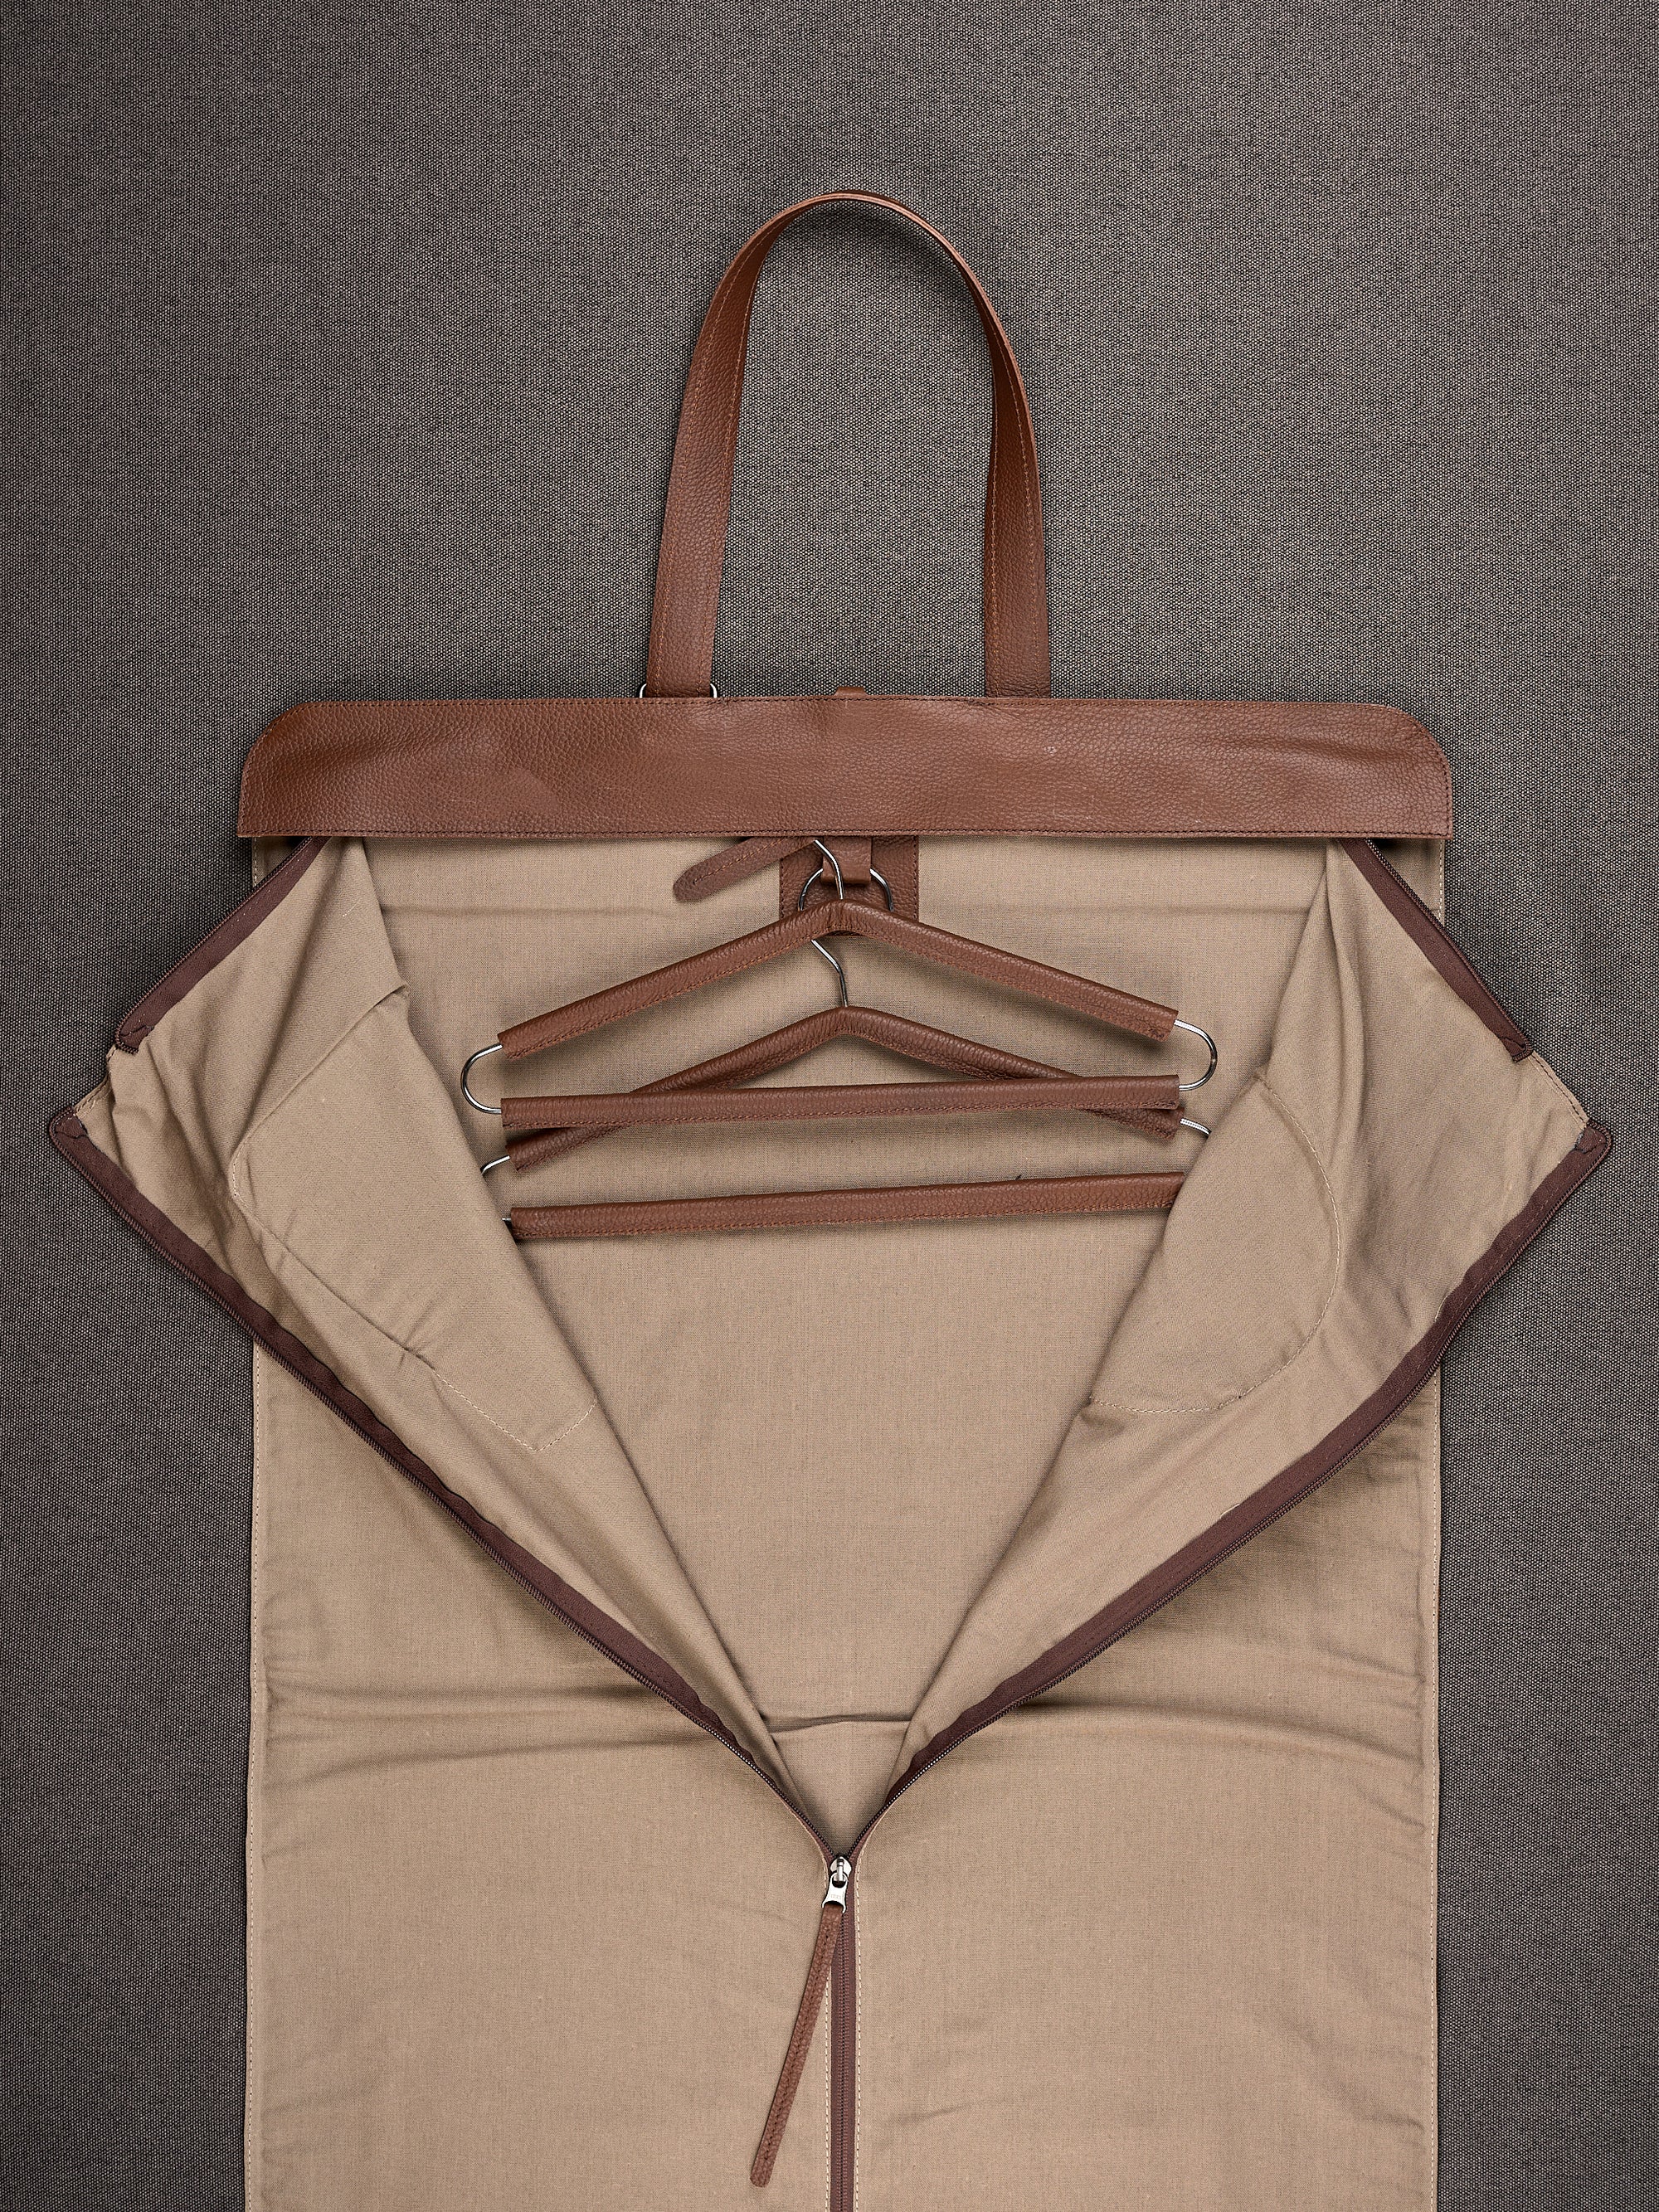 Mens Suit Bag Brown by Capra Leather